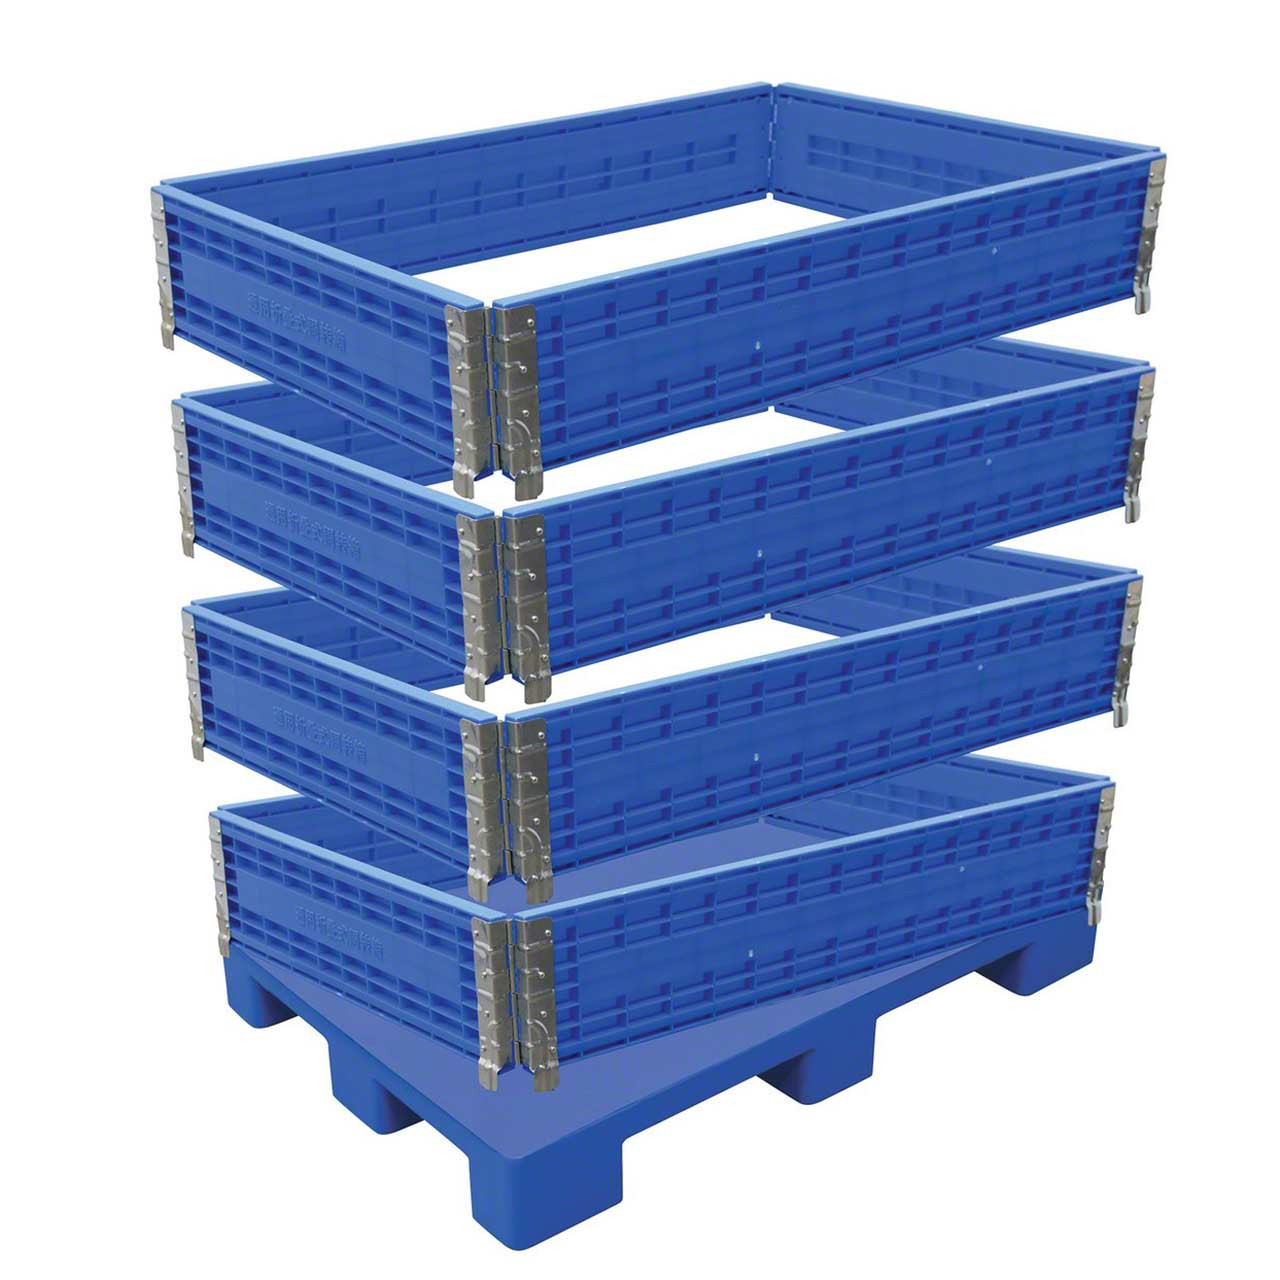 Containers can be from one to four levels high